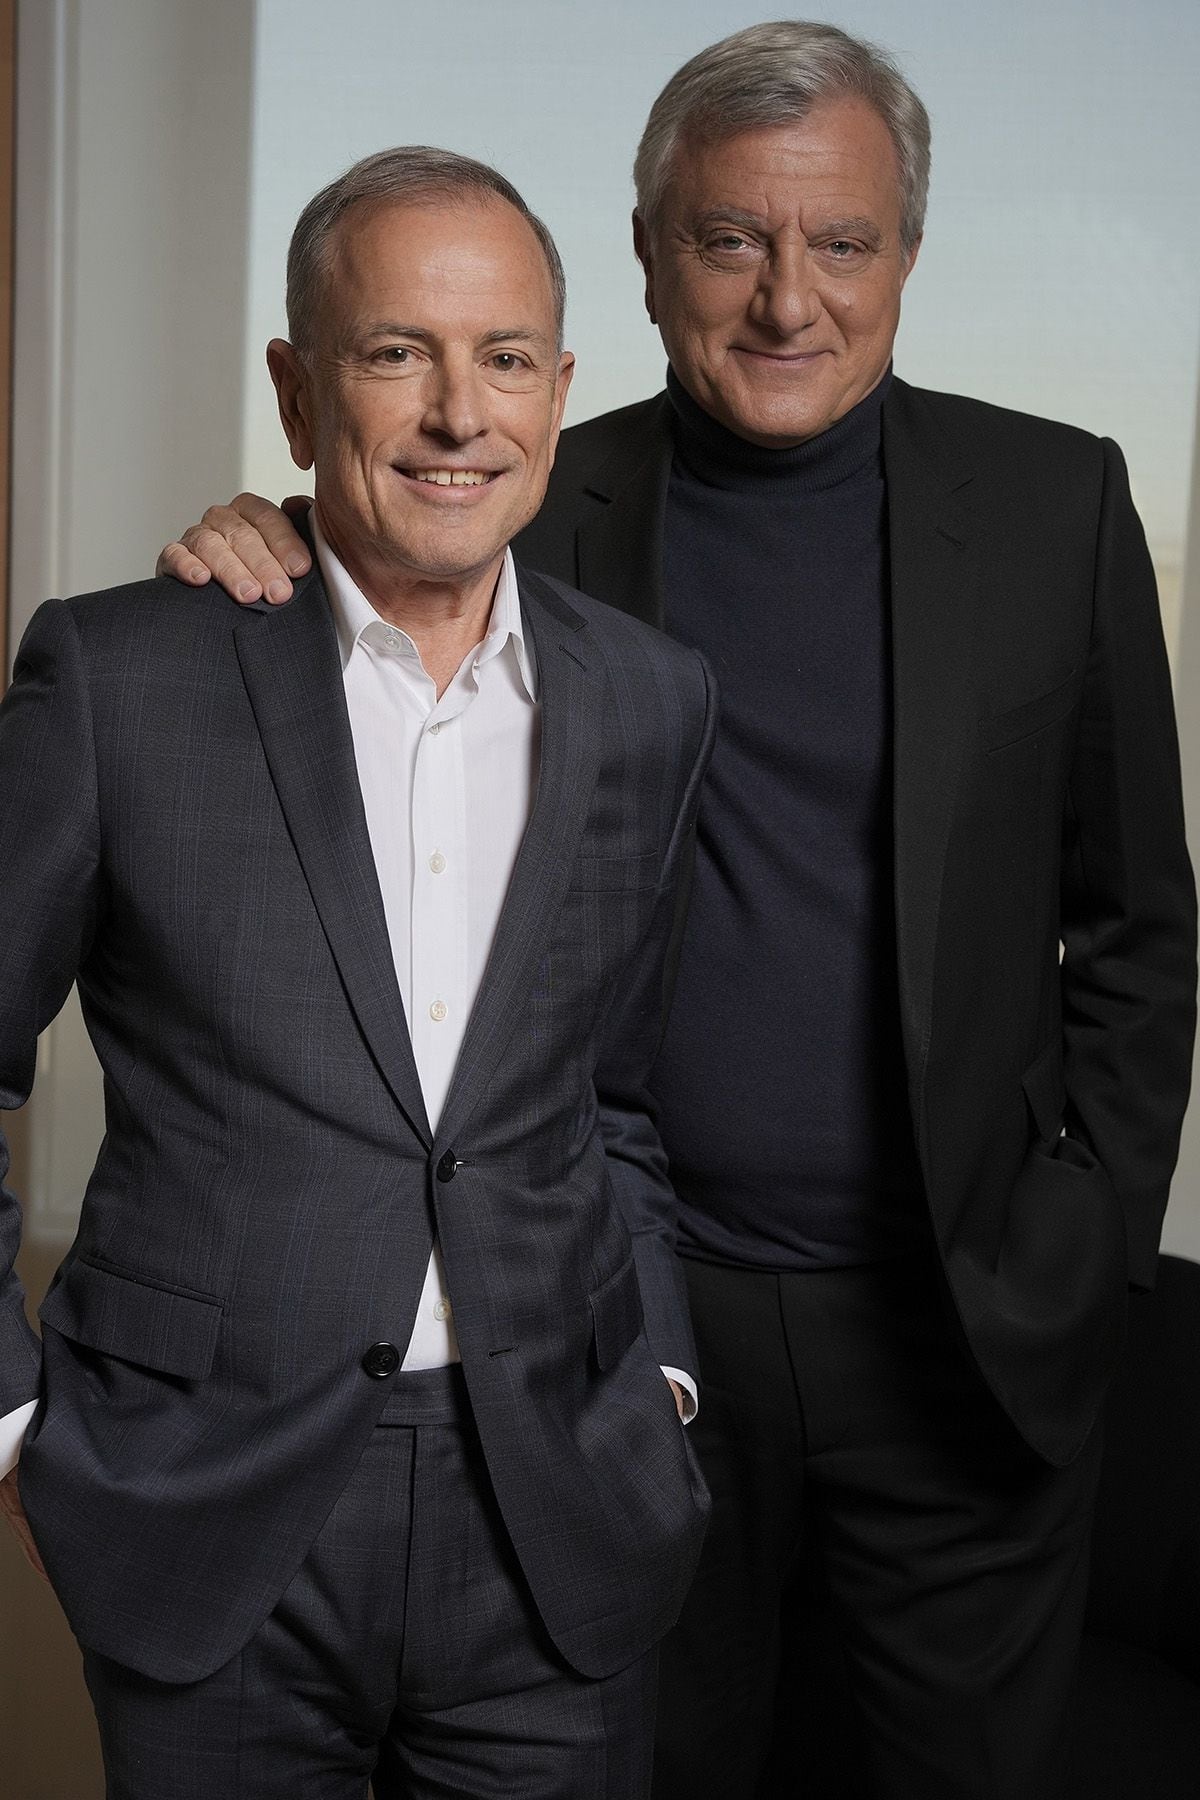 Michael Burke to Succeed Sidney Toledano at LVMH’s Fashion Group